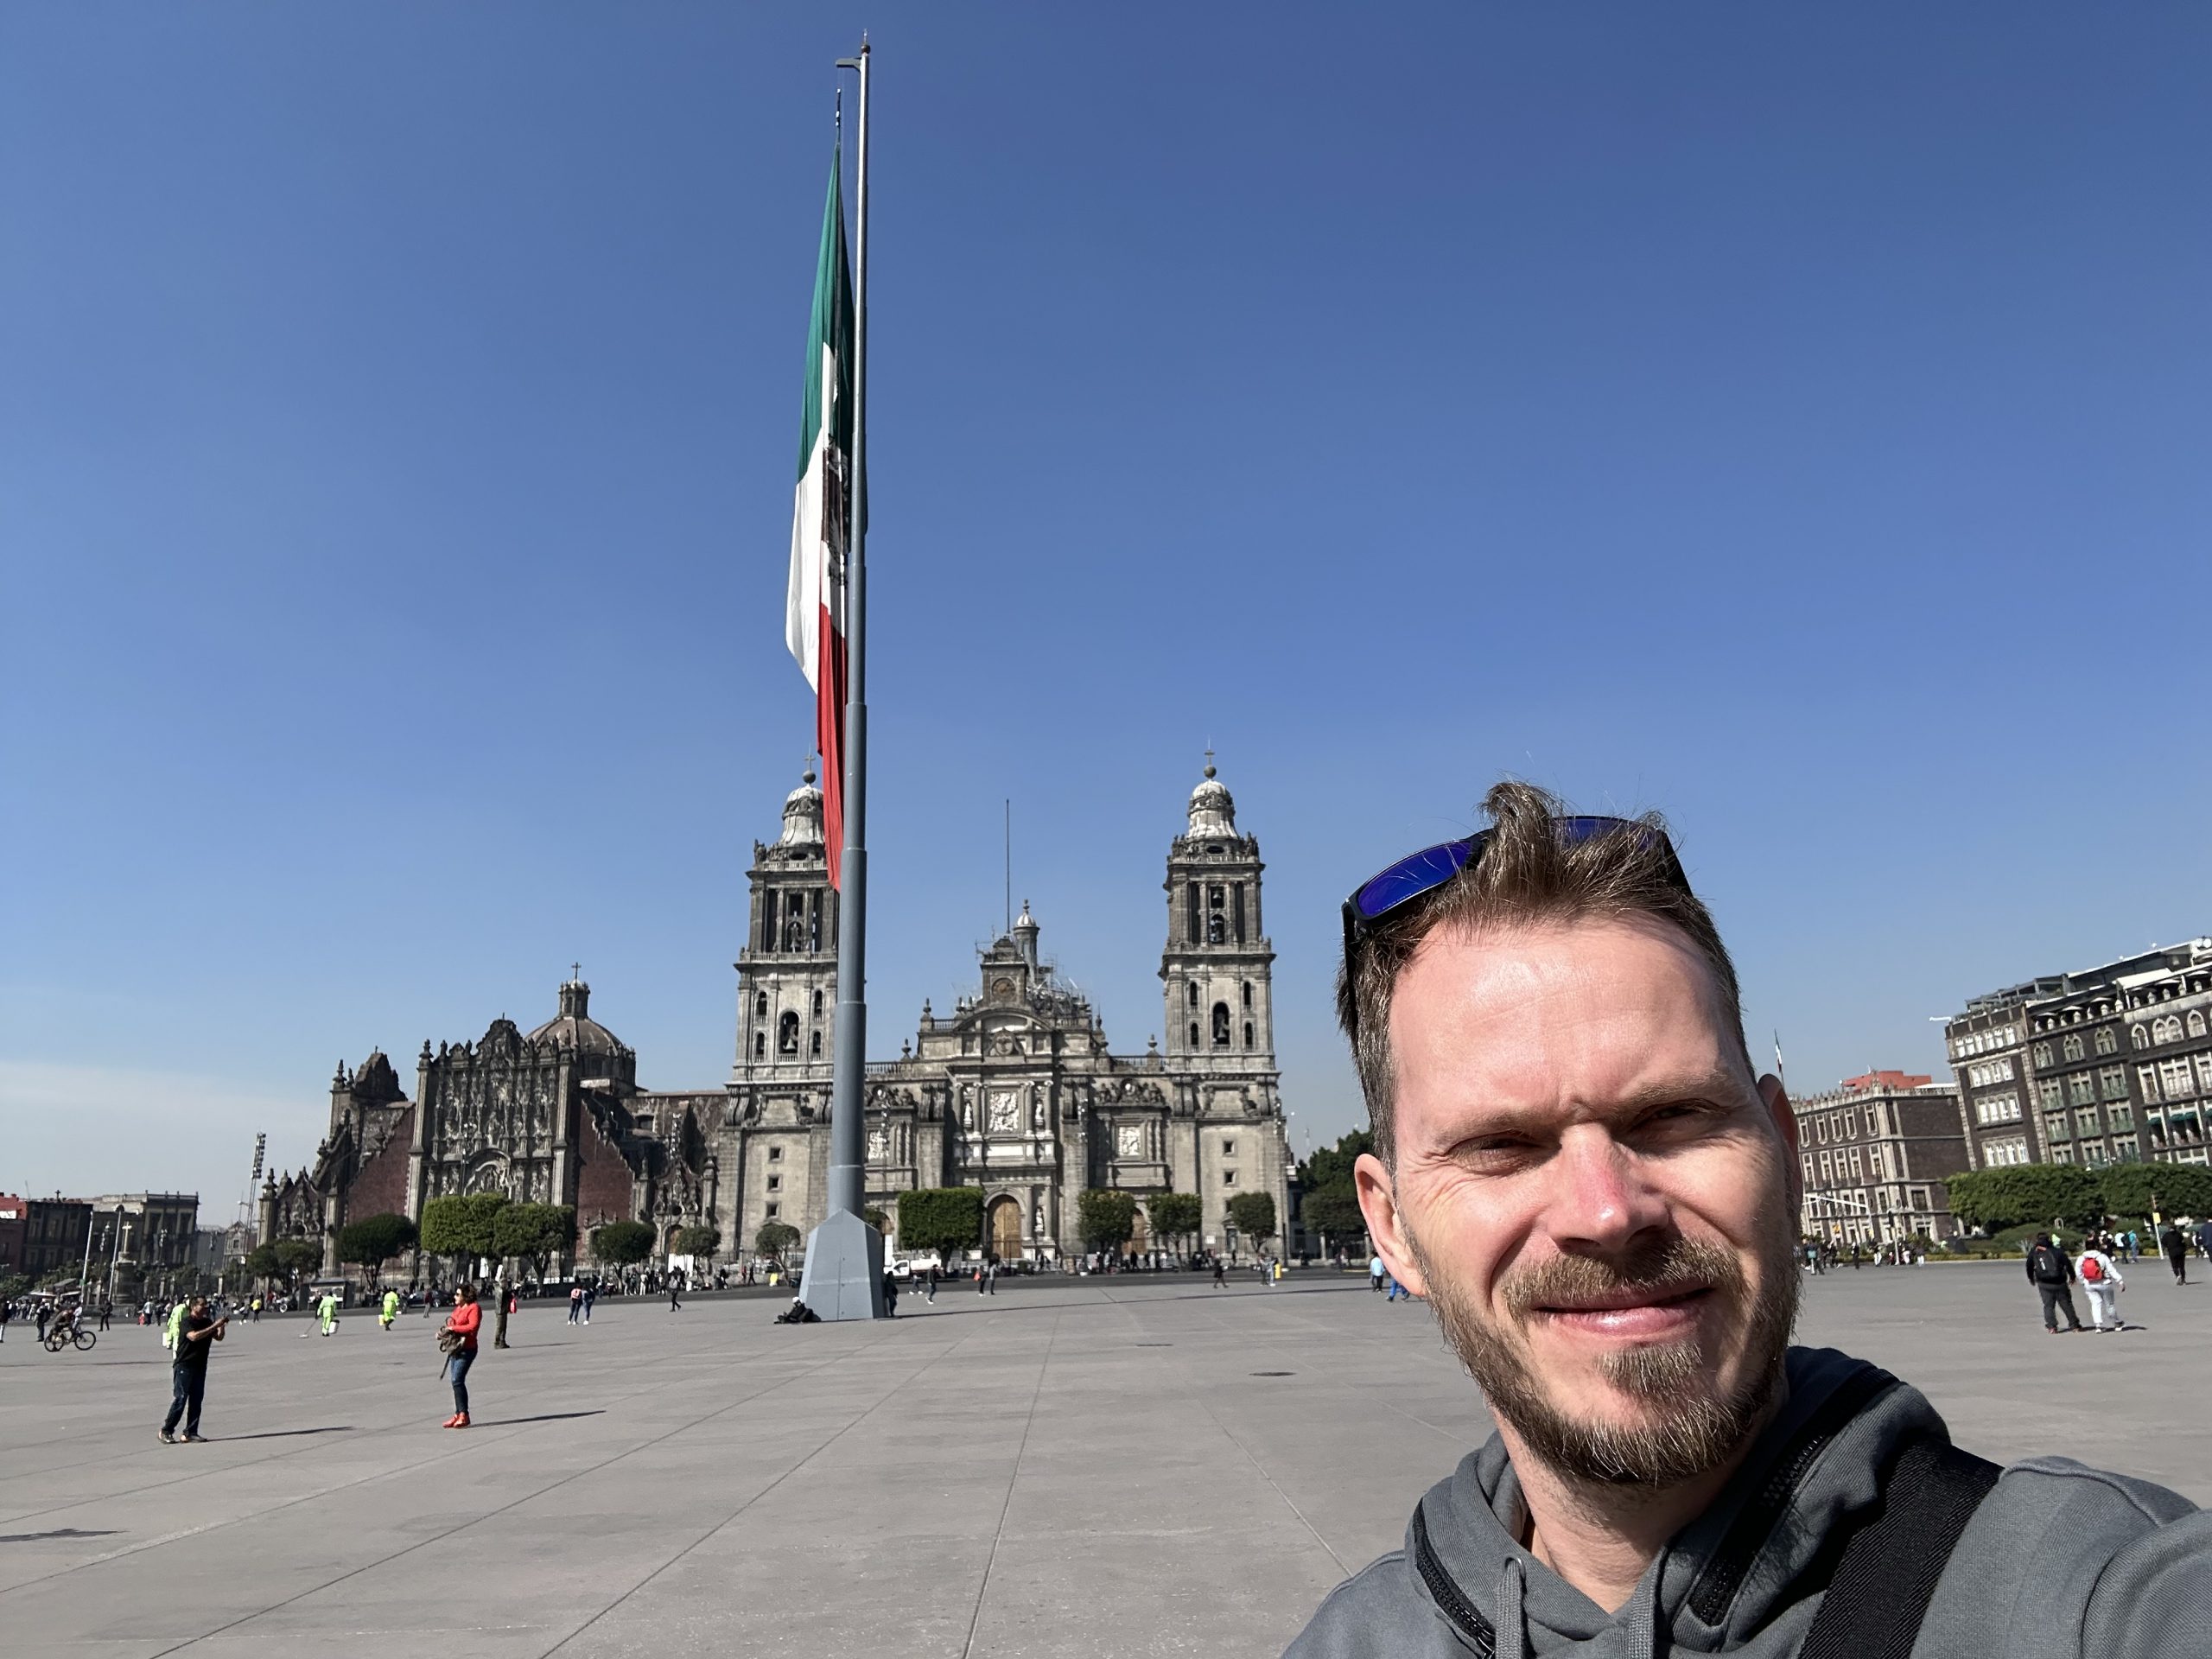 Me traveling in Mexico City